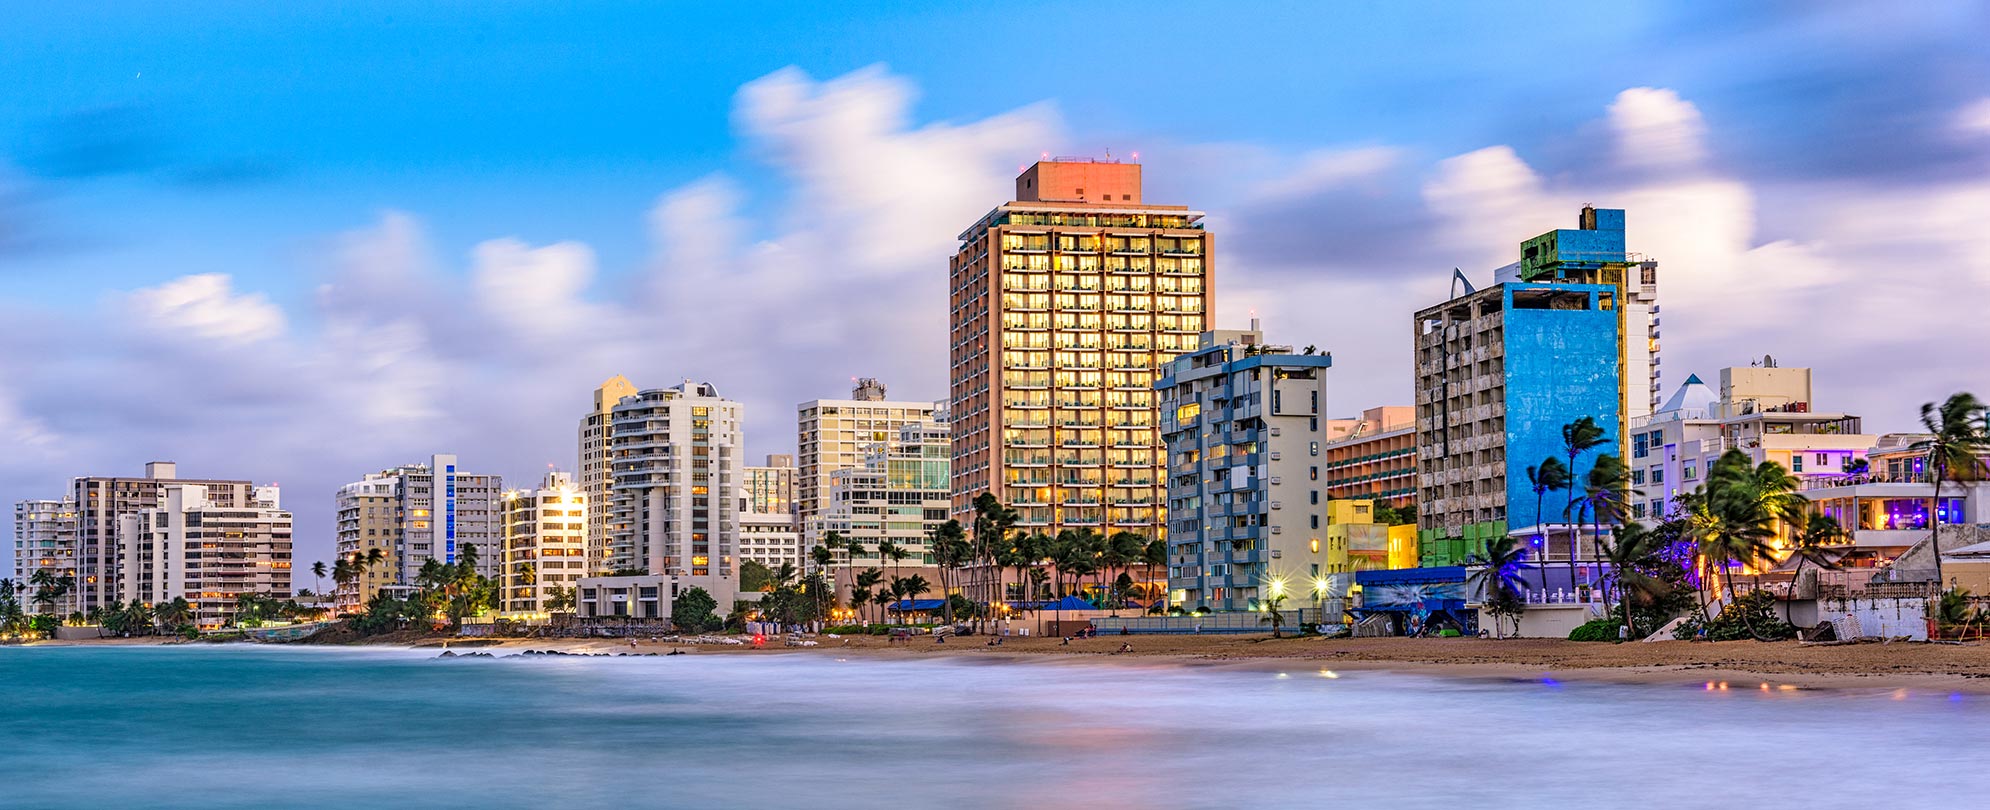 The oceanfront Condado district in Puerto Rico, a luxurious San Juan neighborhood with shopping, dining, and nightlife.